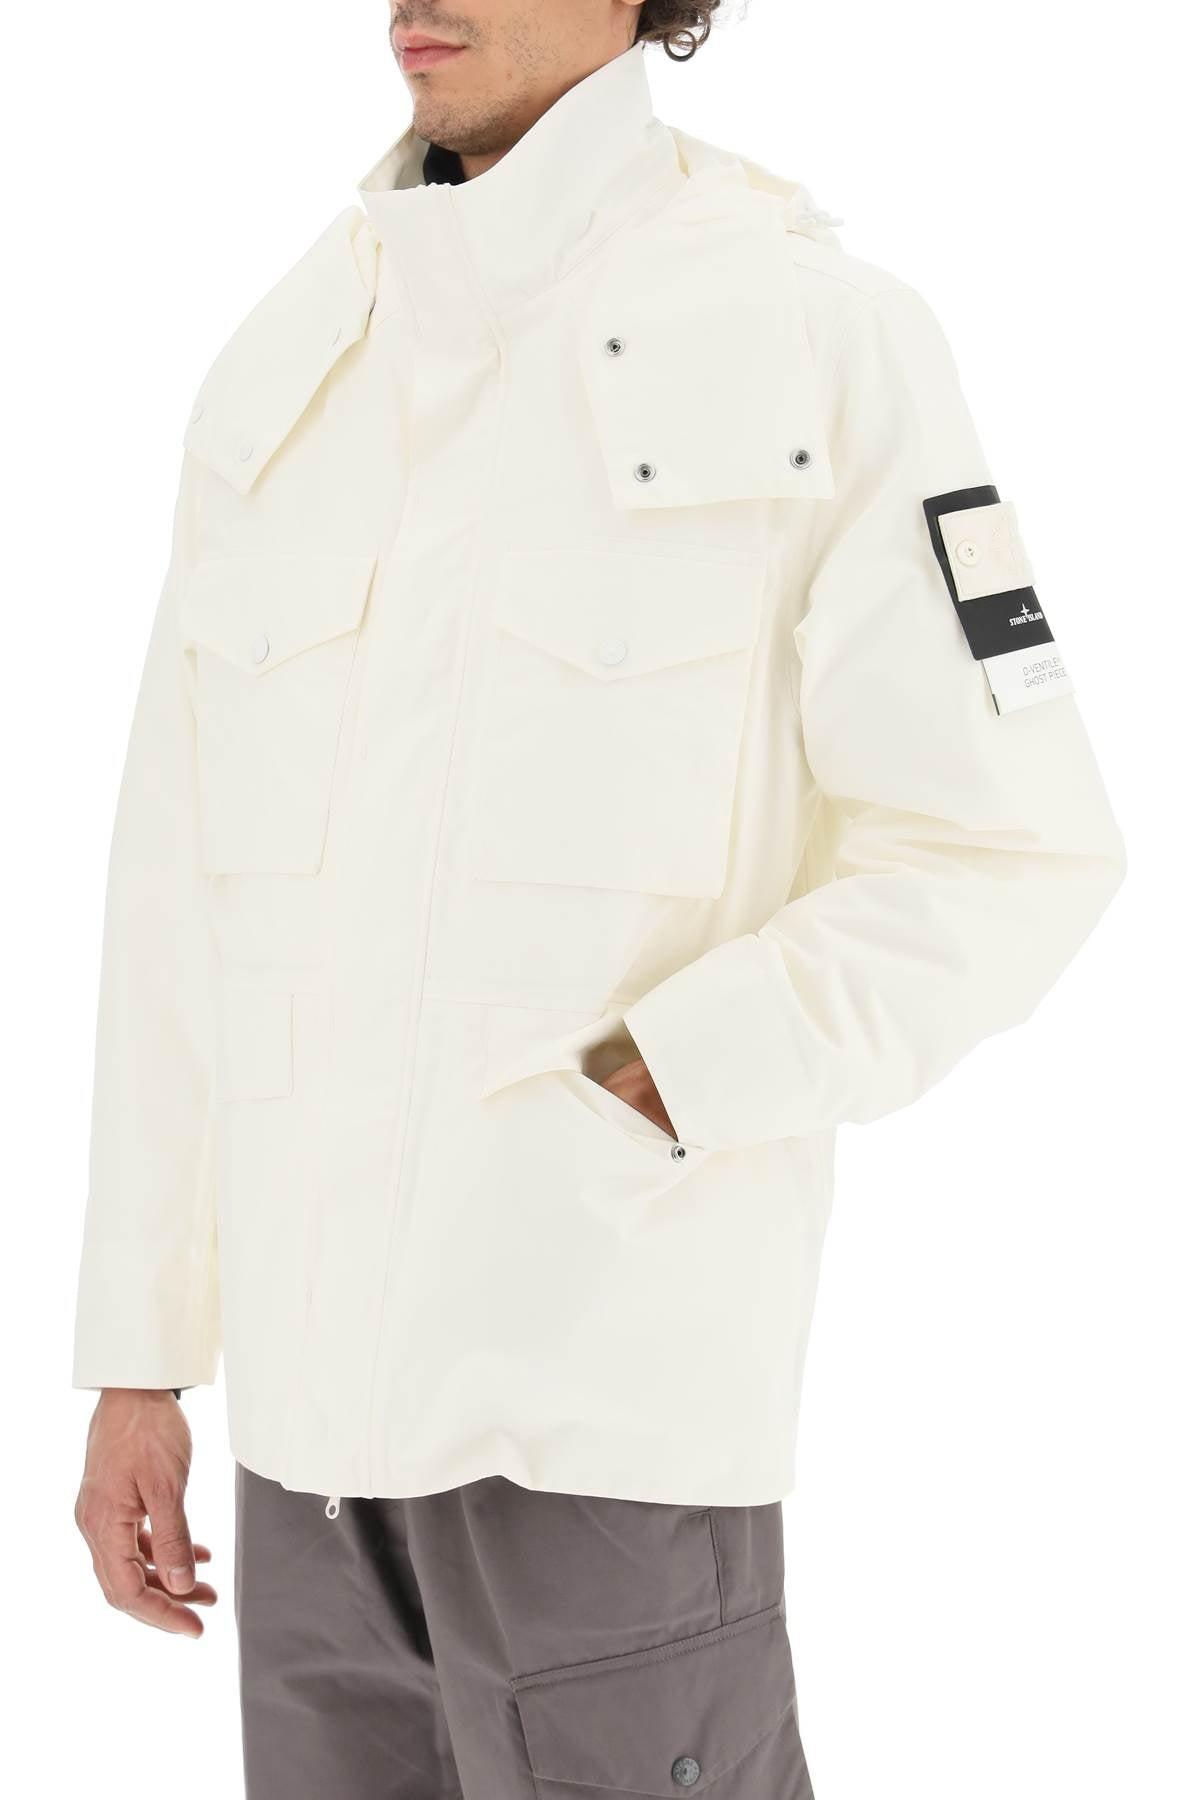 Stone Island Ghost Piece Jacket in White for Men | Lyst